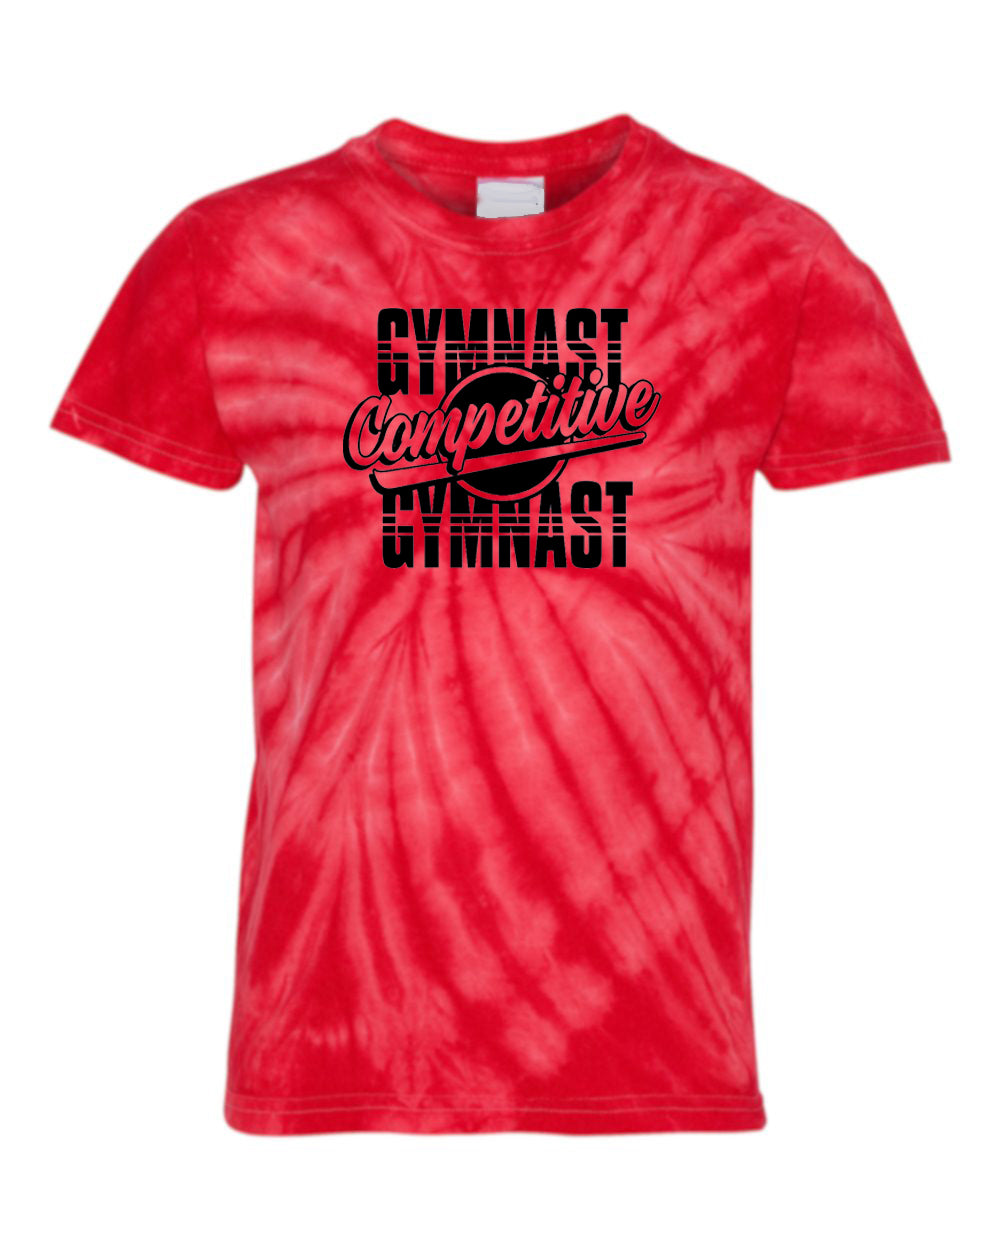 Competitive Gymnast Youth Tie Dye T-Shirt Red